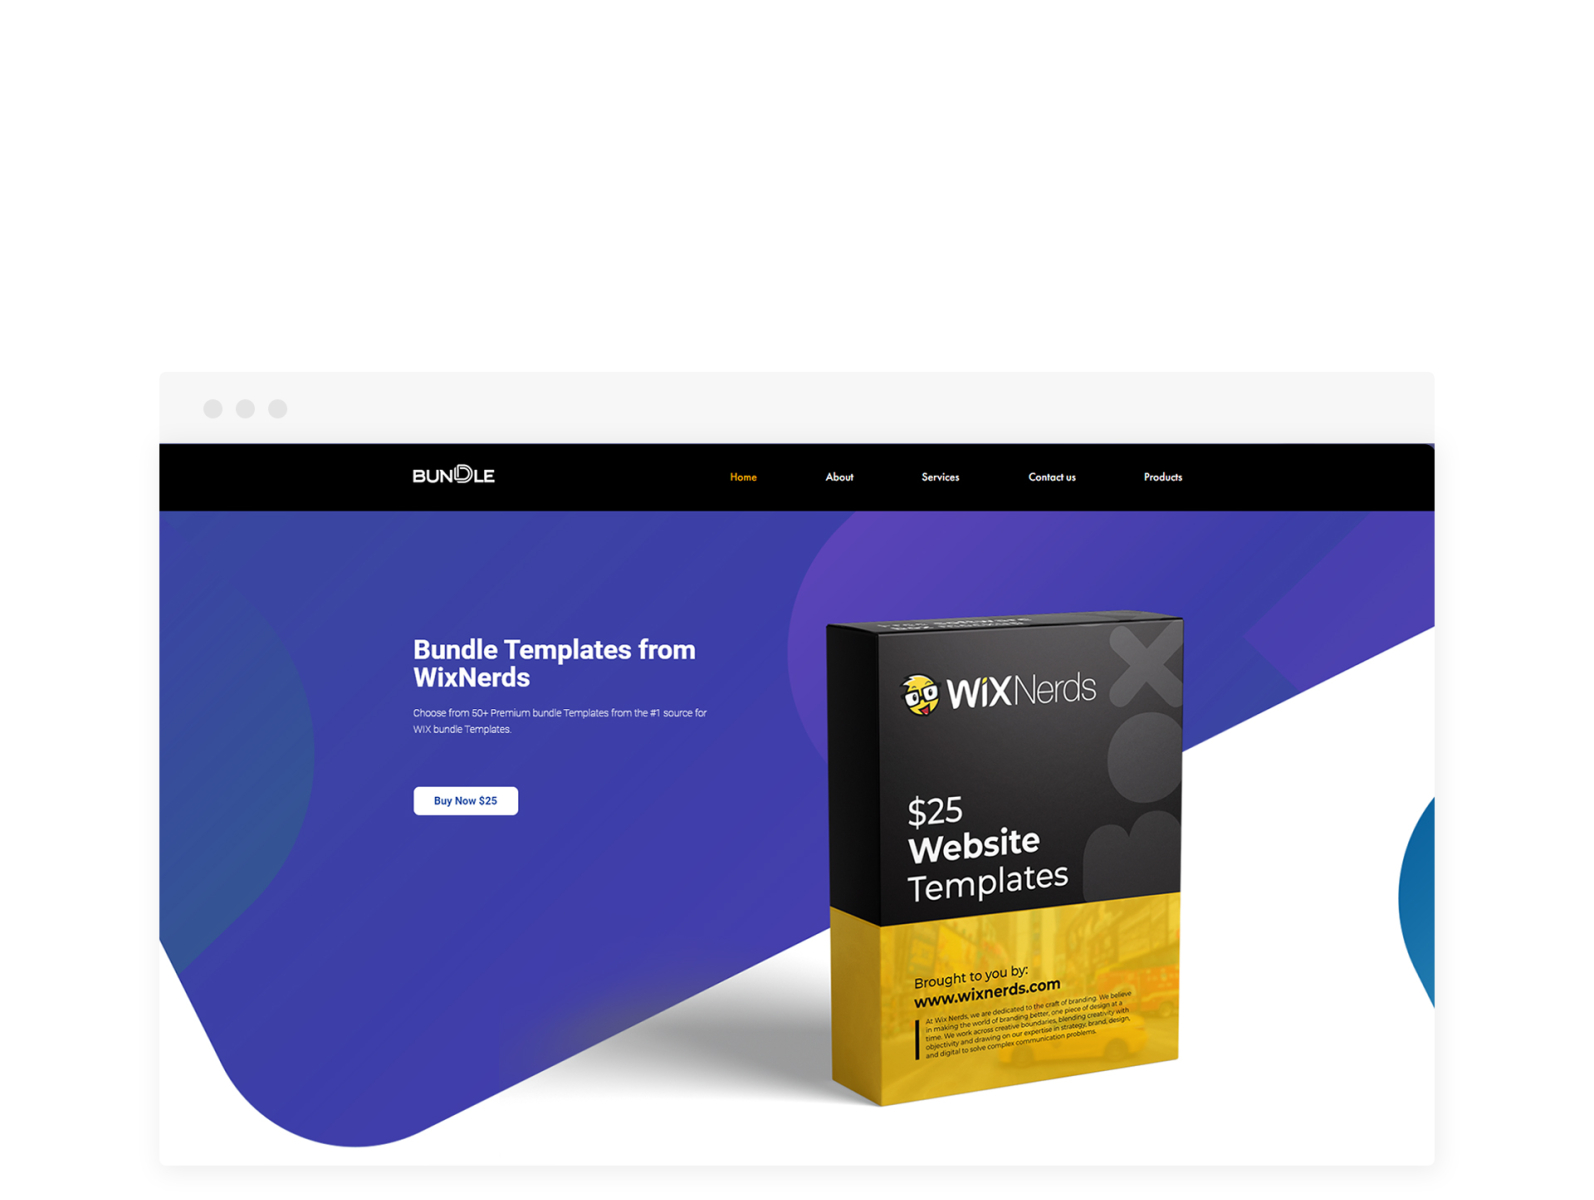 Multipurpose Mobile Ready Premium Wix Templates by Dave Elossais on